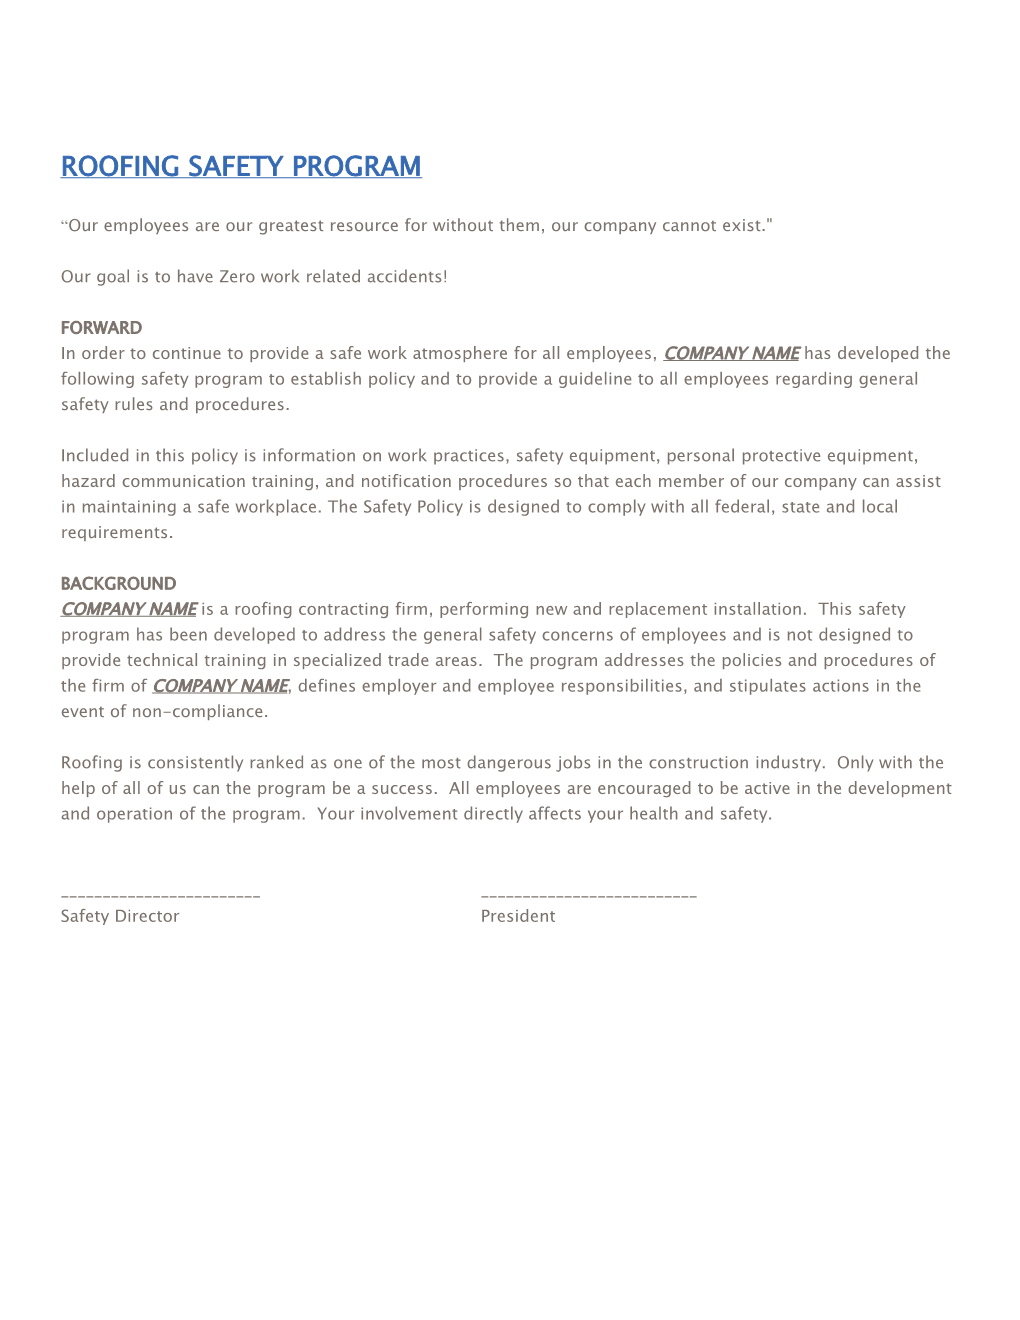 Roofing Safety Program